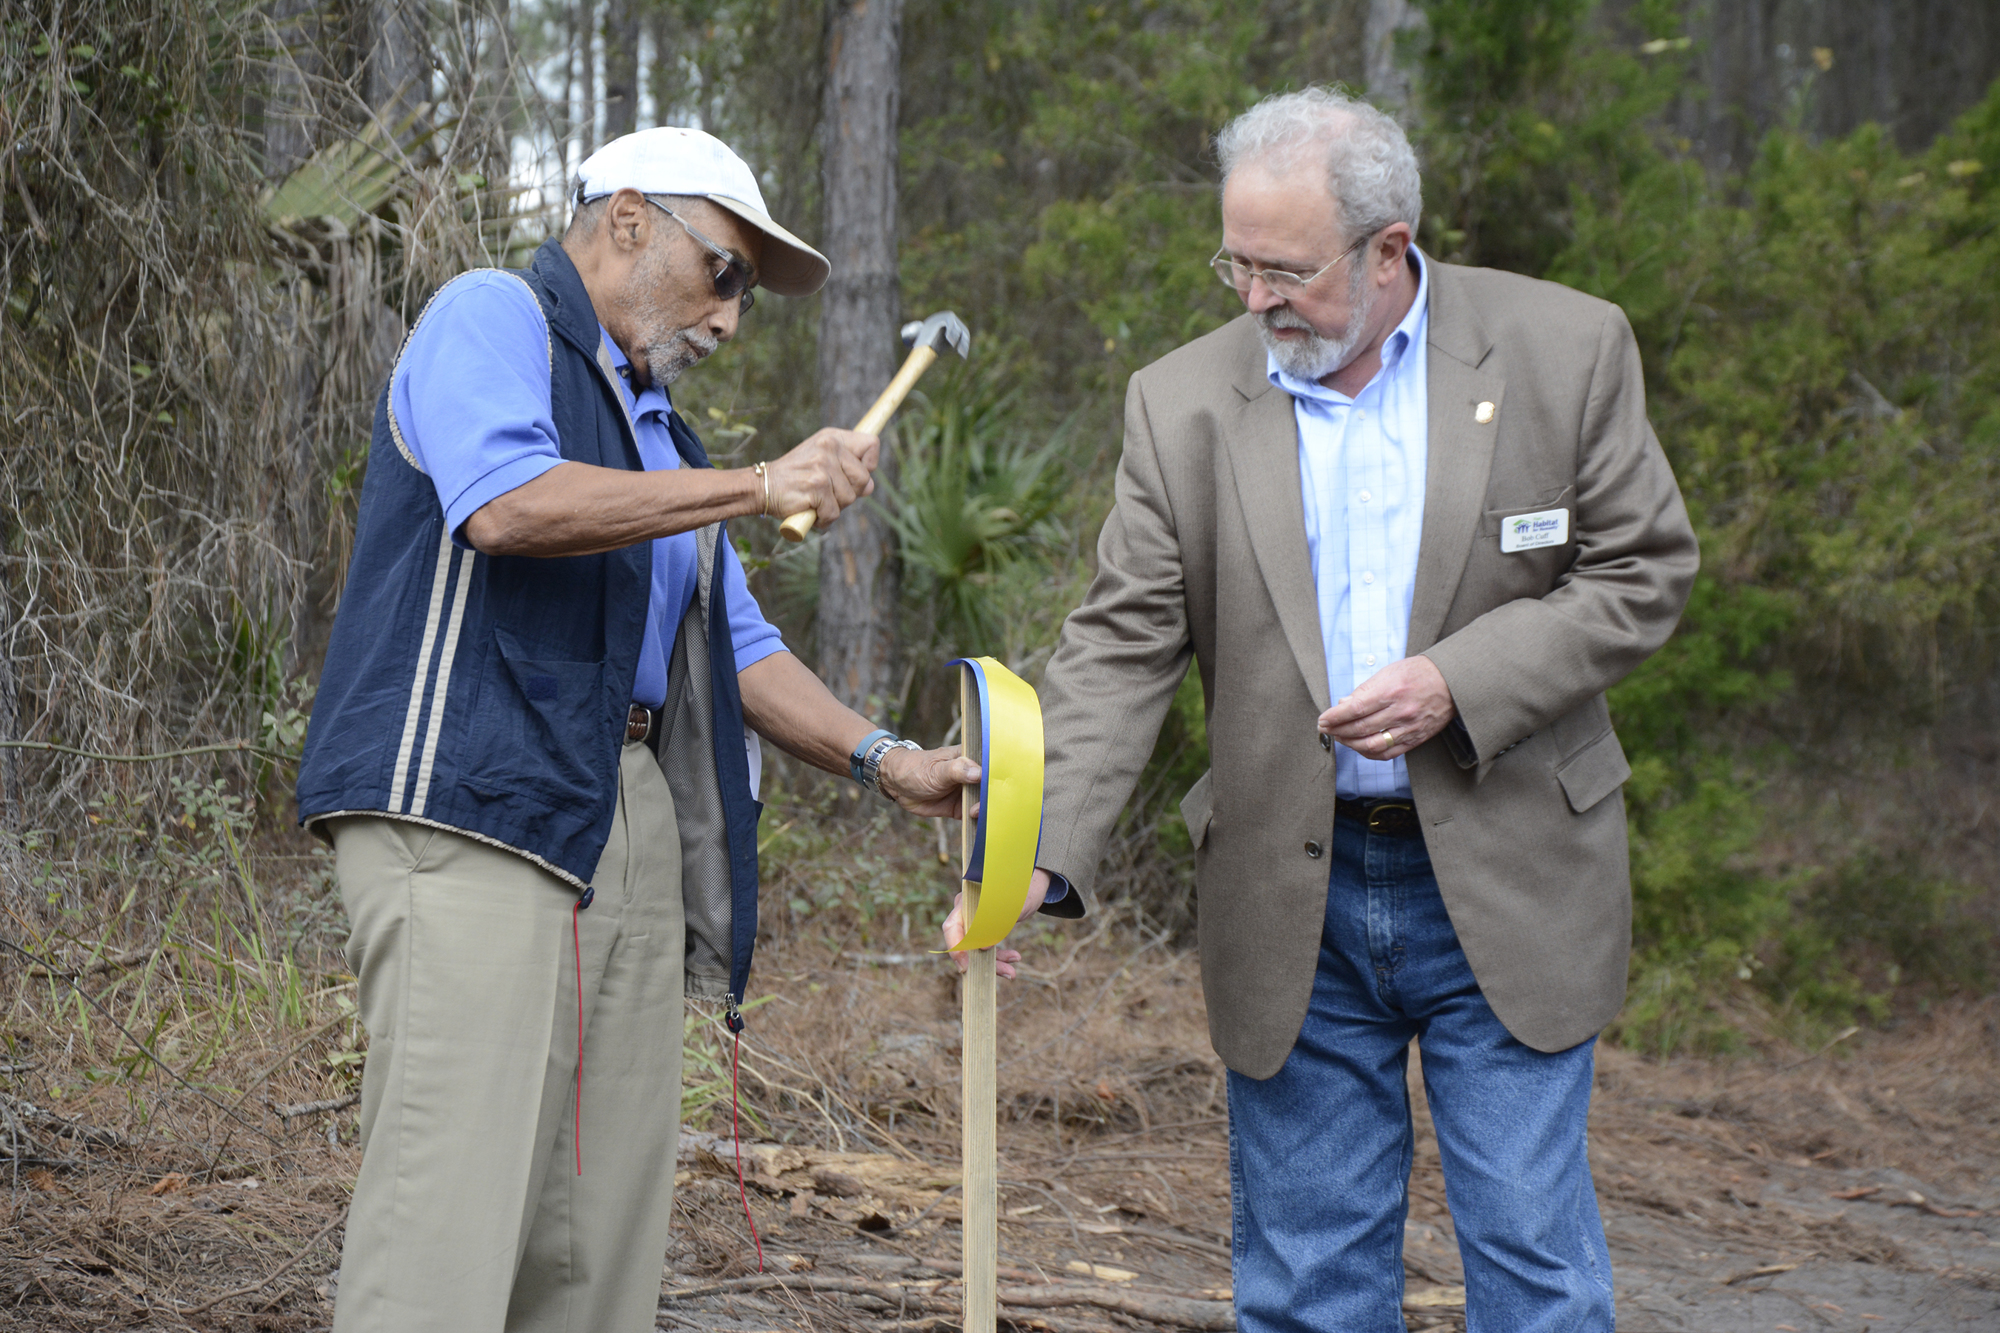 The first stake was drilled into the ground by past Flagler Rotary Club President Jim Callender with founding and current member of the Flagler Habitat Board of Directors Bob Cuff, in honor of Dr. Jim Guines.